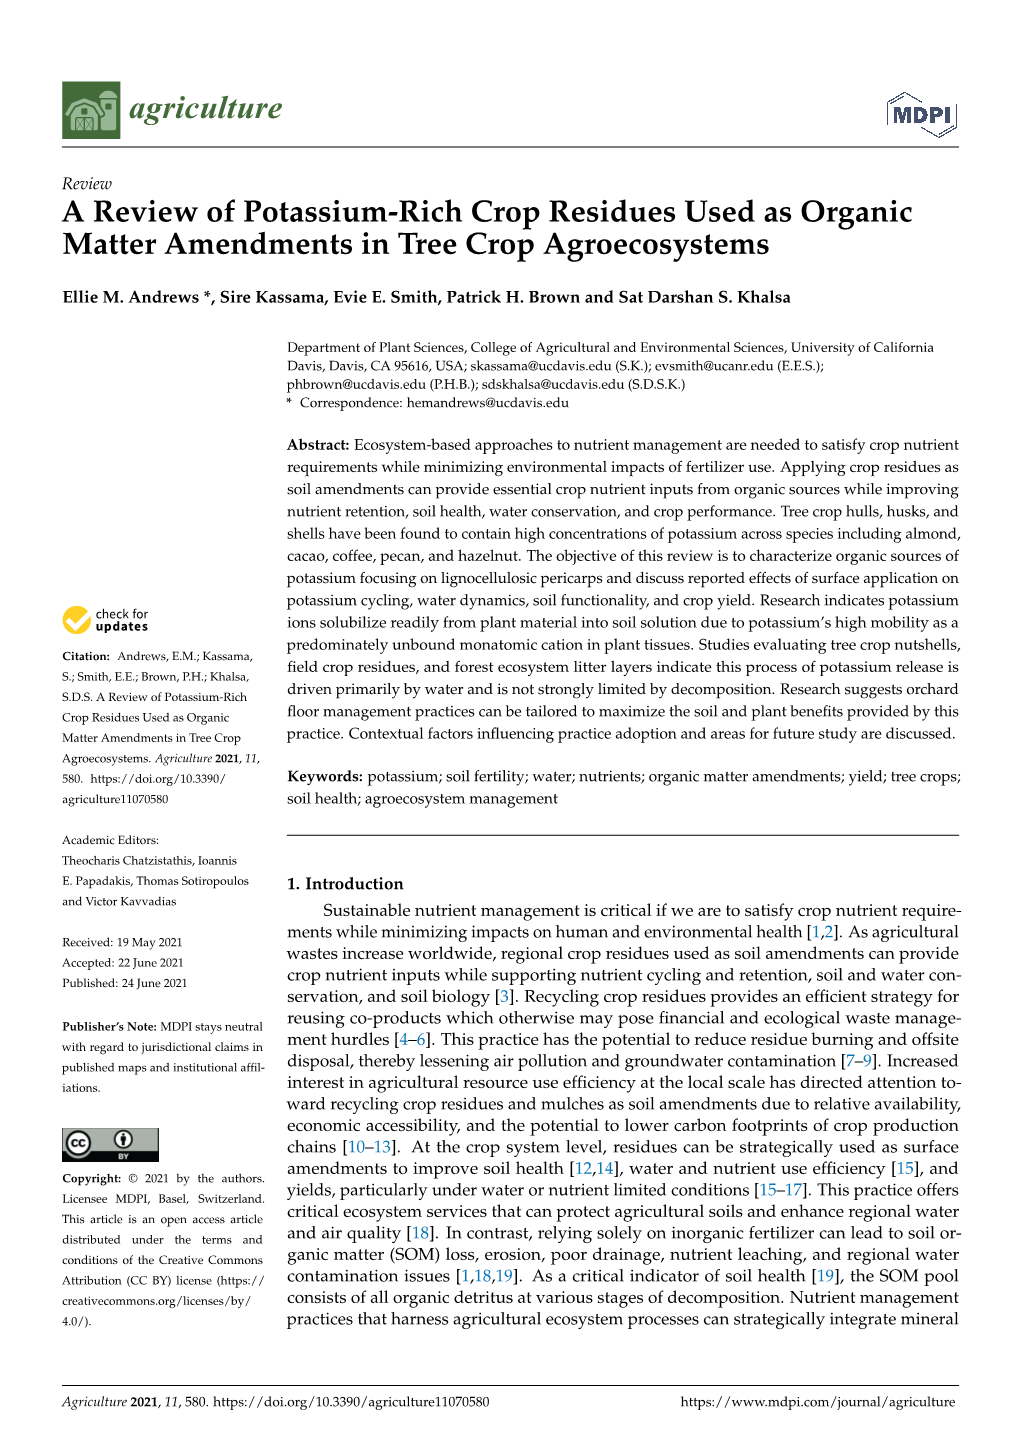 A Review of Potassium-Rich Crop Residues Used As Organic Matter Amendments in Tree Crop Agroecosystems